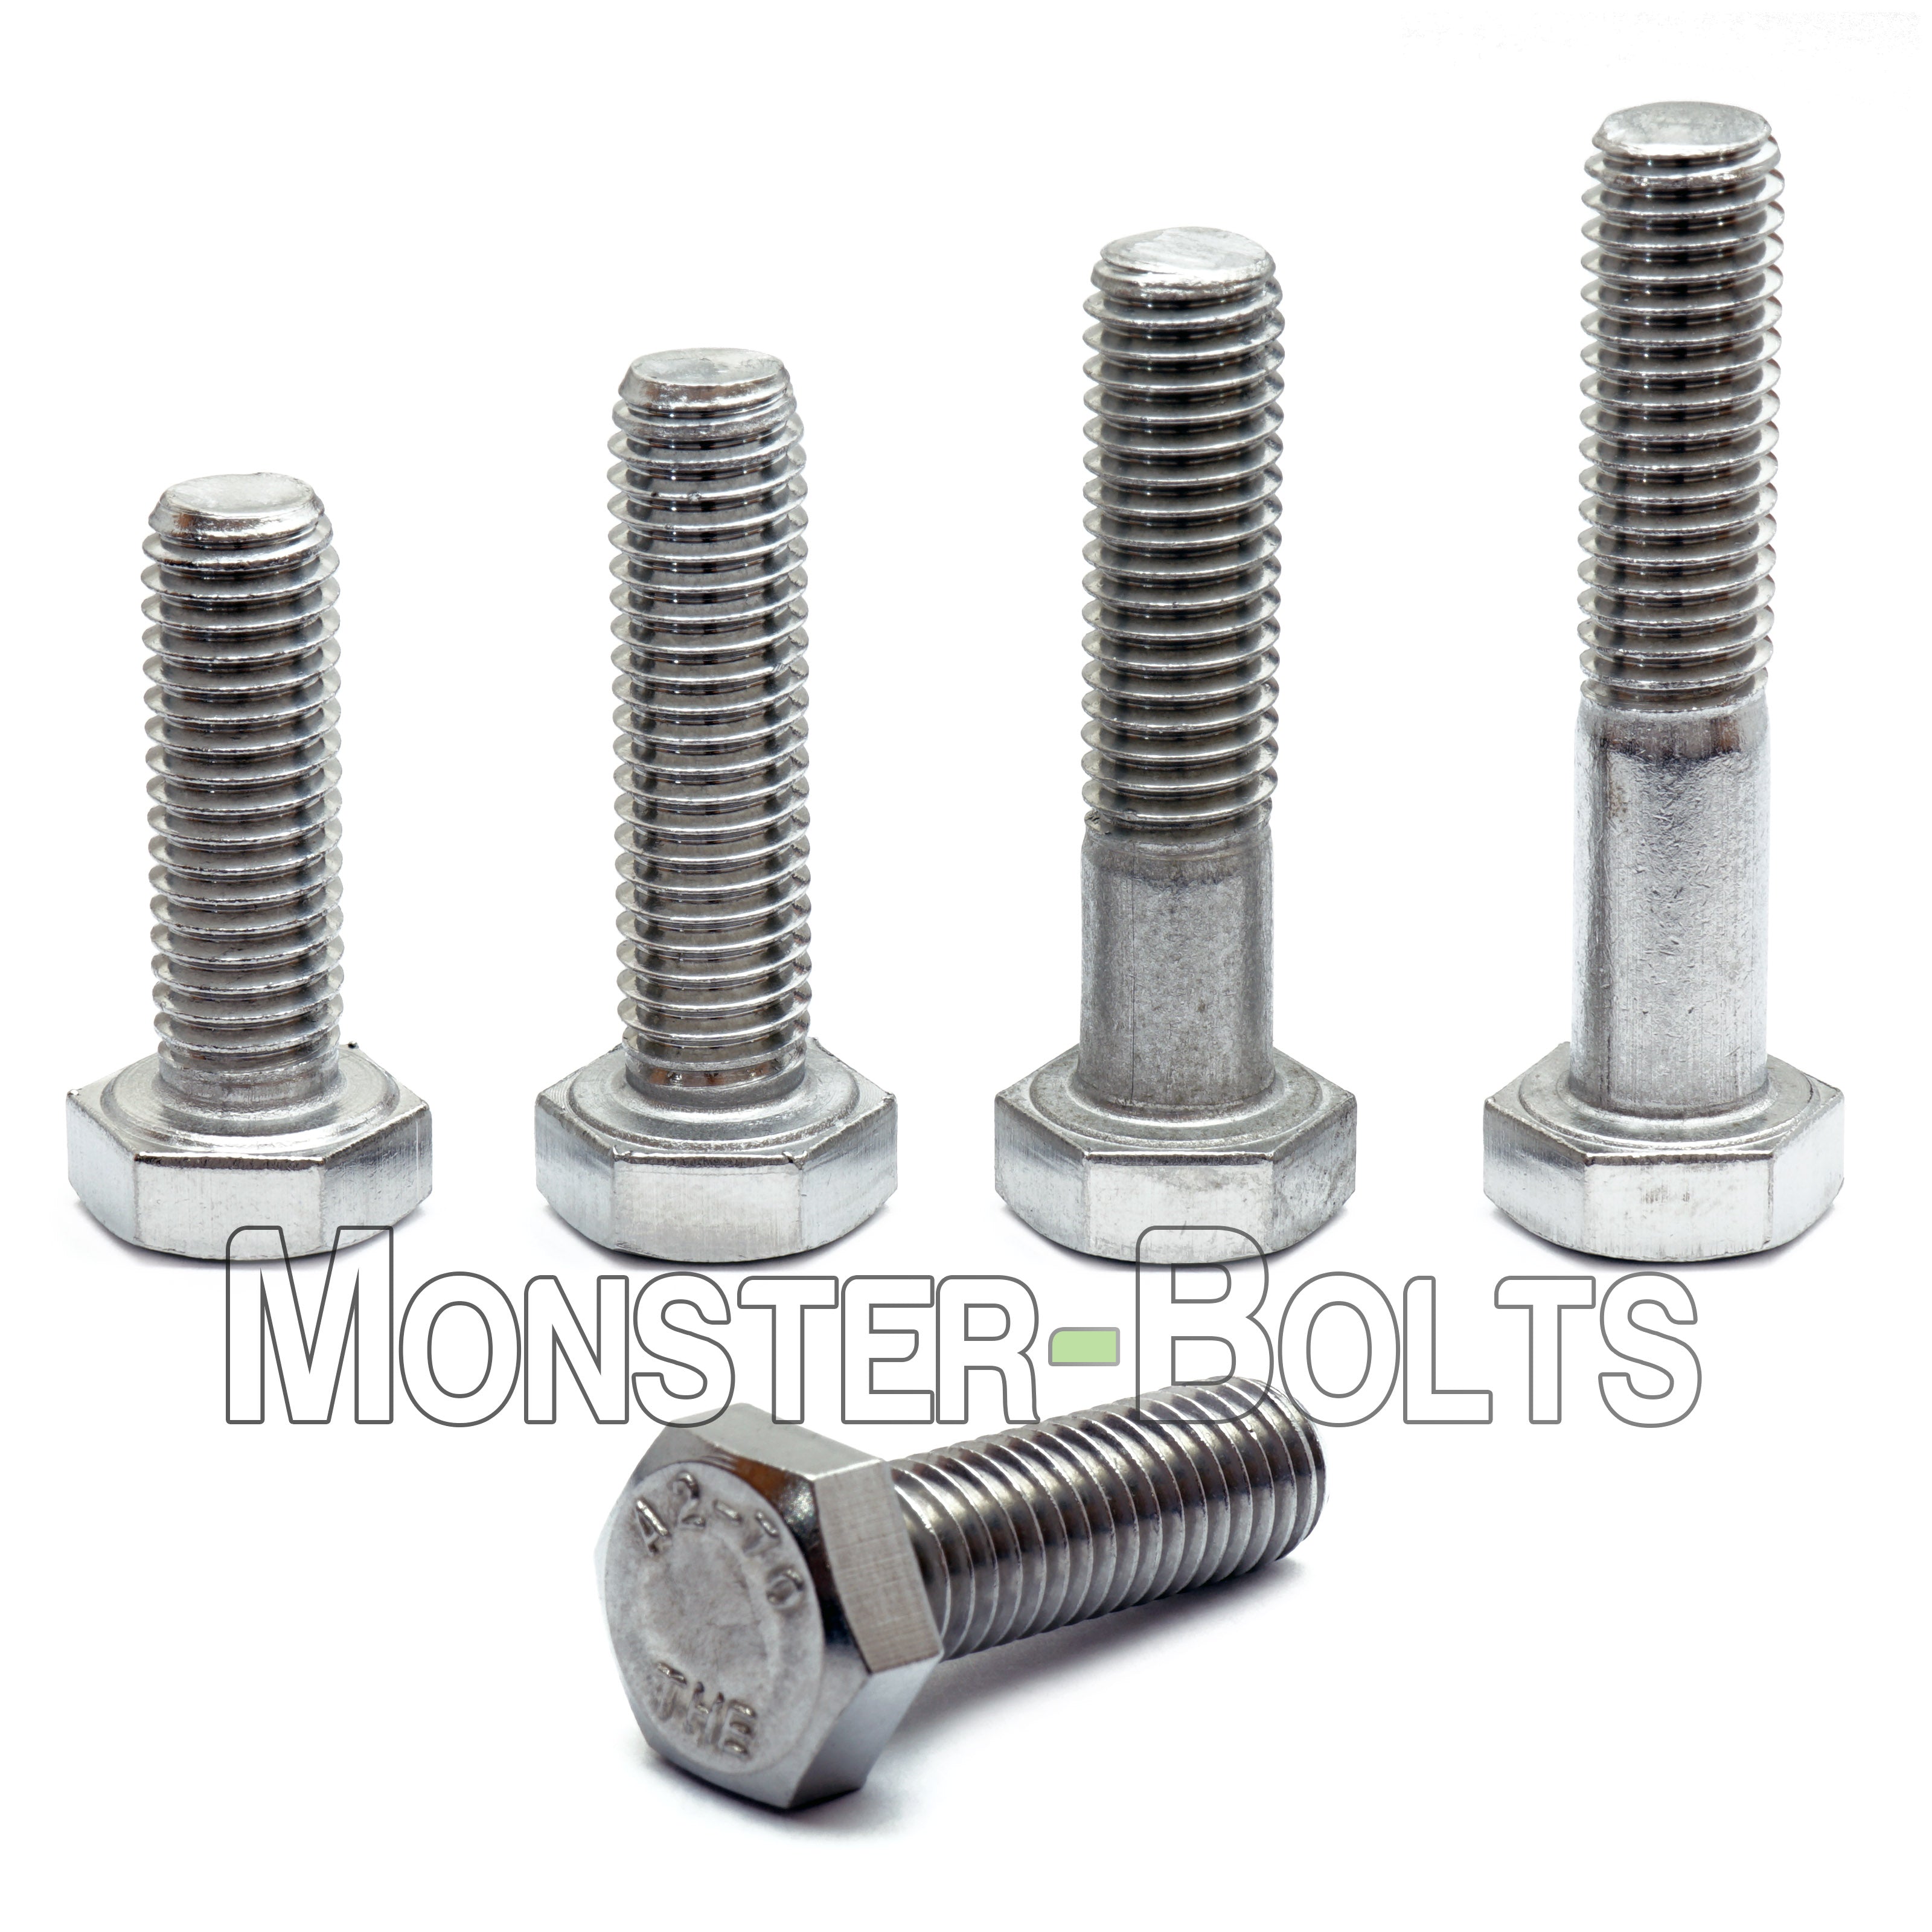 NUTS & WASHERS M6 x 25mm A2 STAINLESS STEEL HEXAGONAL HEAD SET SCREWS/BOLTS 